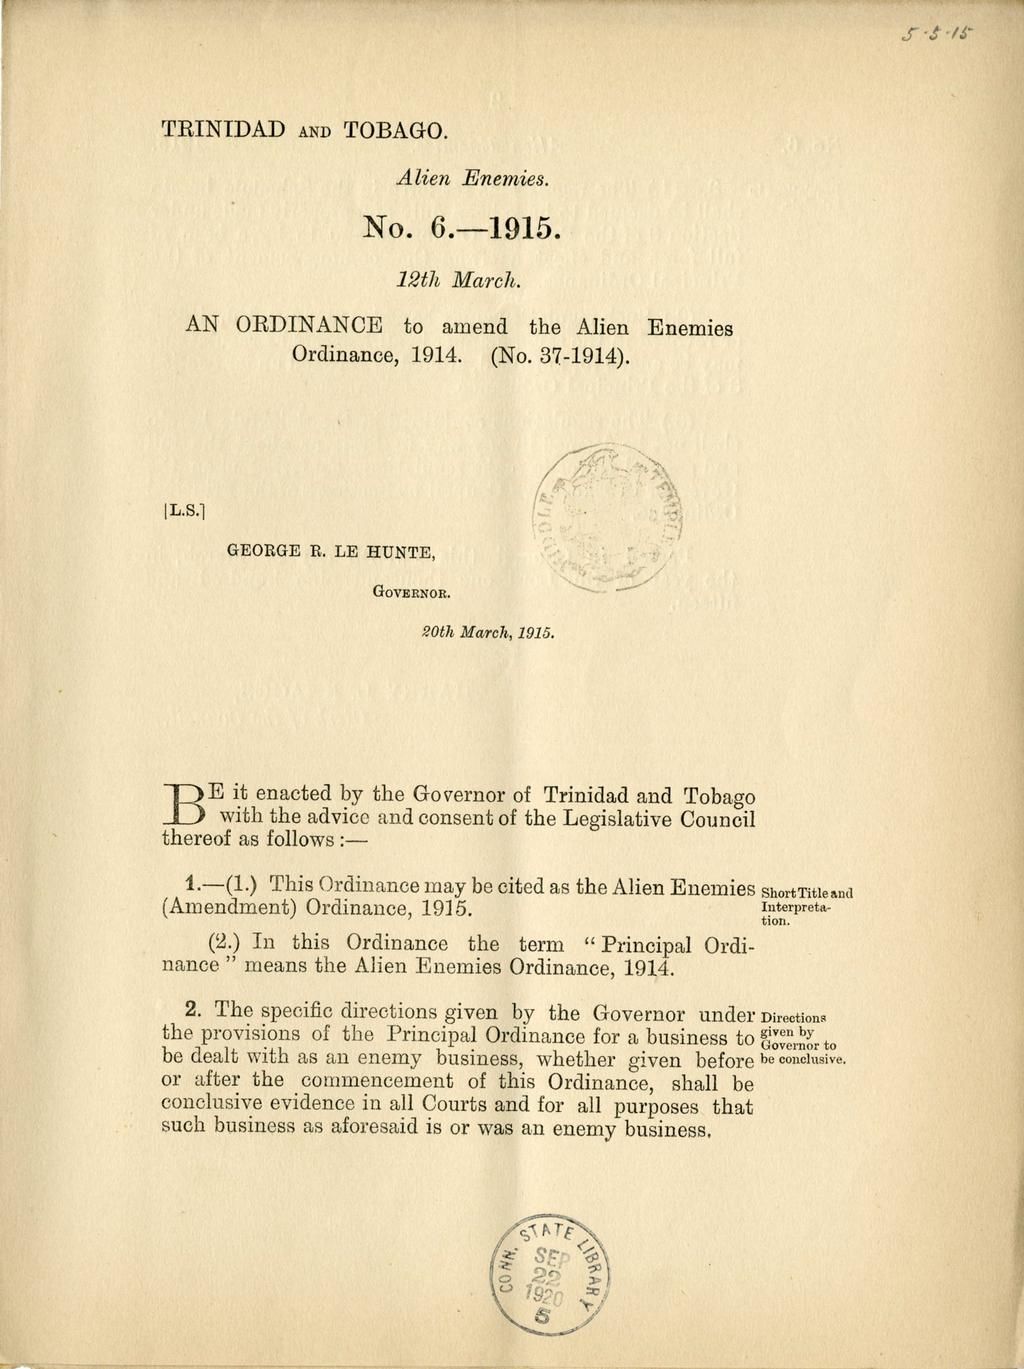 r TRINIDAD AND TOBAGO. Alien Enemies. No. 6.-1915. 12th March. AN ORDINANCE to amend the Alien Enemies Ordinance, 1914. (No. 37-1914). [L.S.] GEORGE R. LE HUNTE, v'4 ',xrll GOVERNOR. 20th March, 1915.